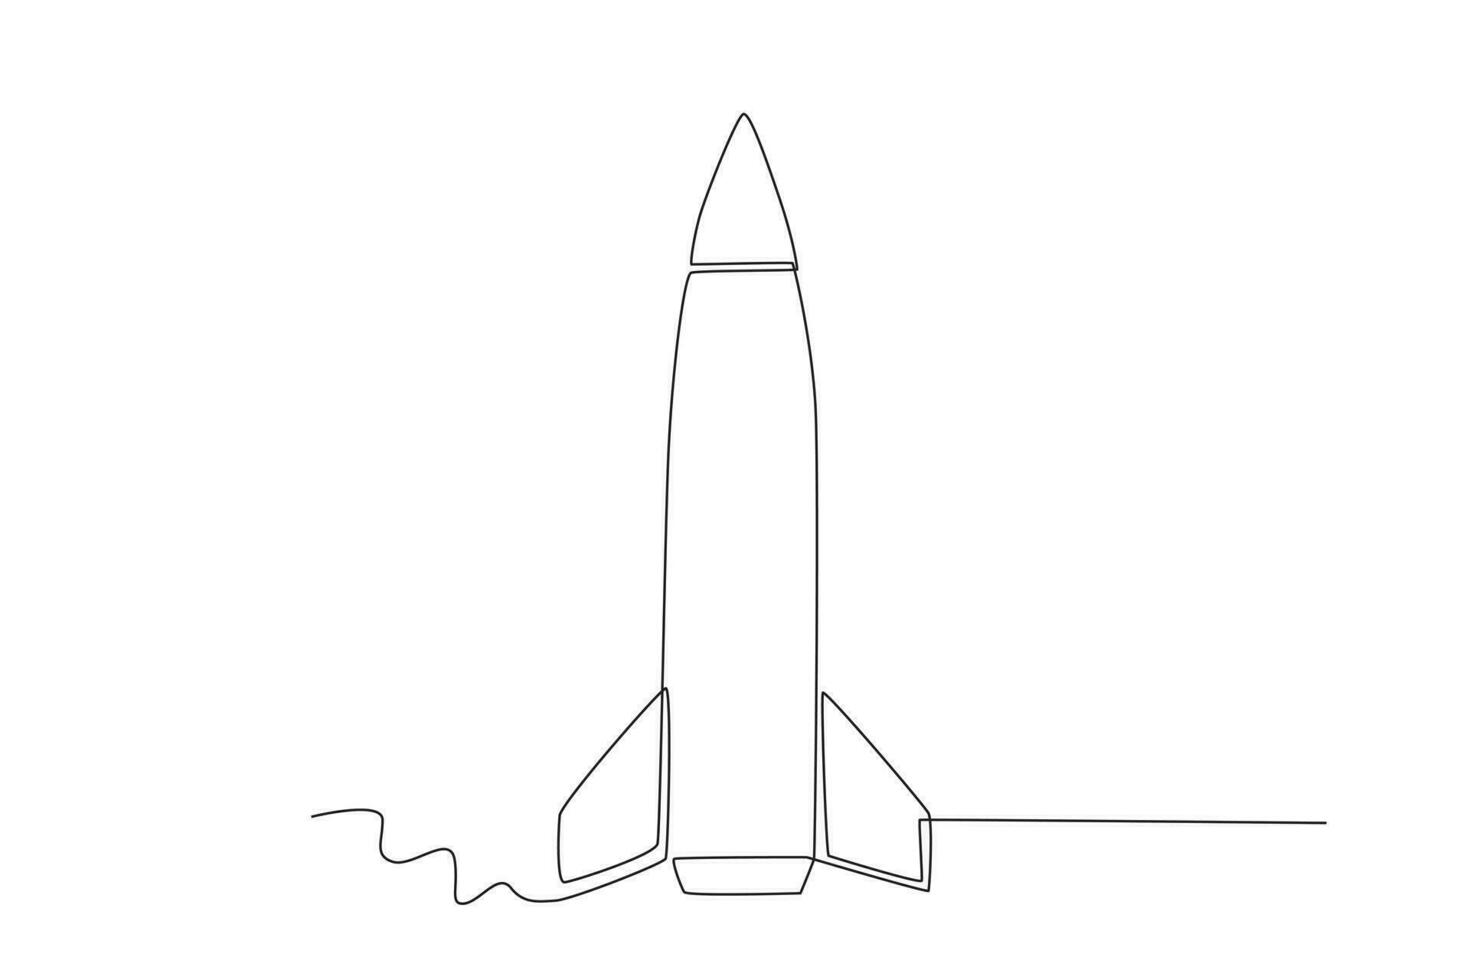 A nuclear weapons rocket vector